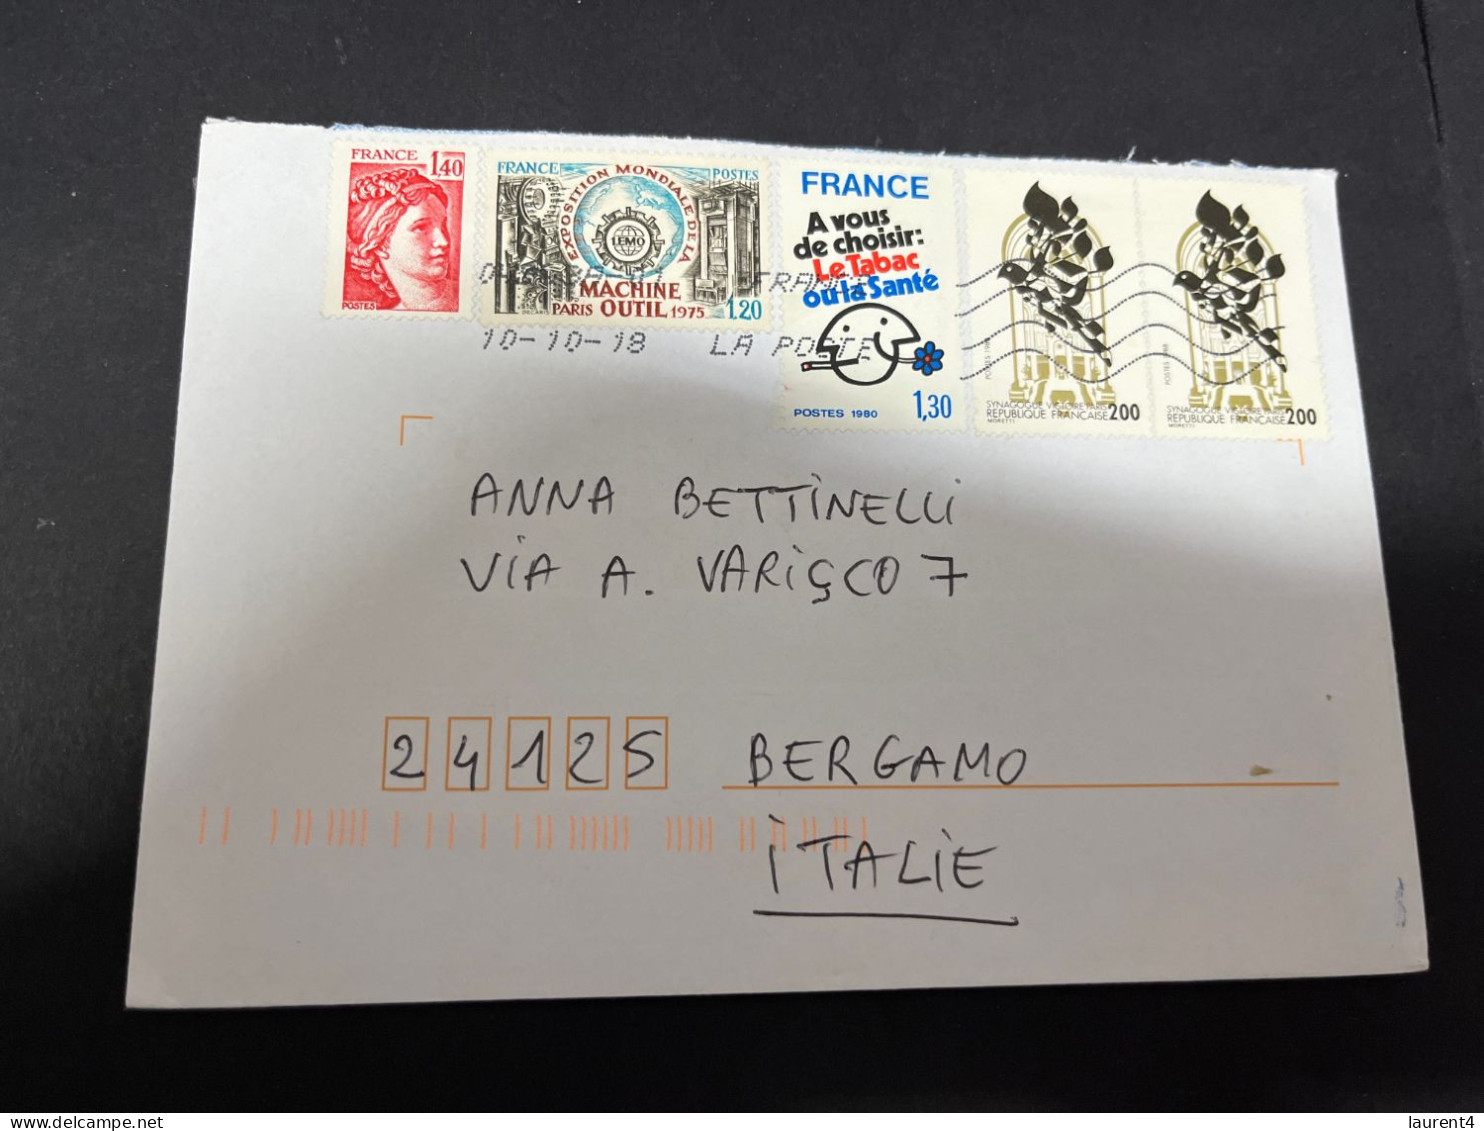 25-3-2024 (4 Y 4) 2 Letter Posted From France To Italy (with Many Stamps - 1 No Postmark) - Briefe U. Dokumente